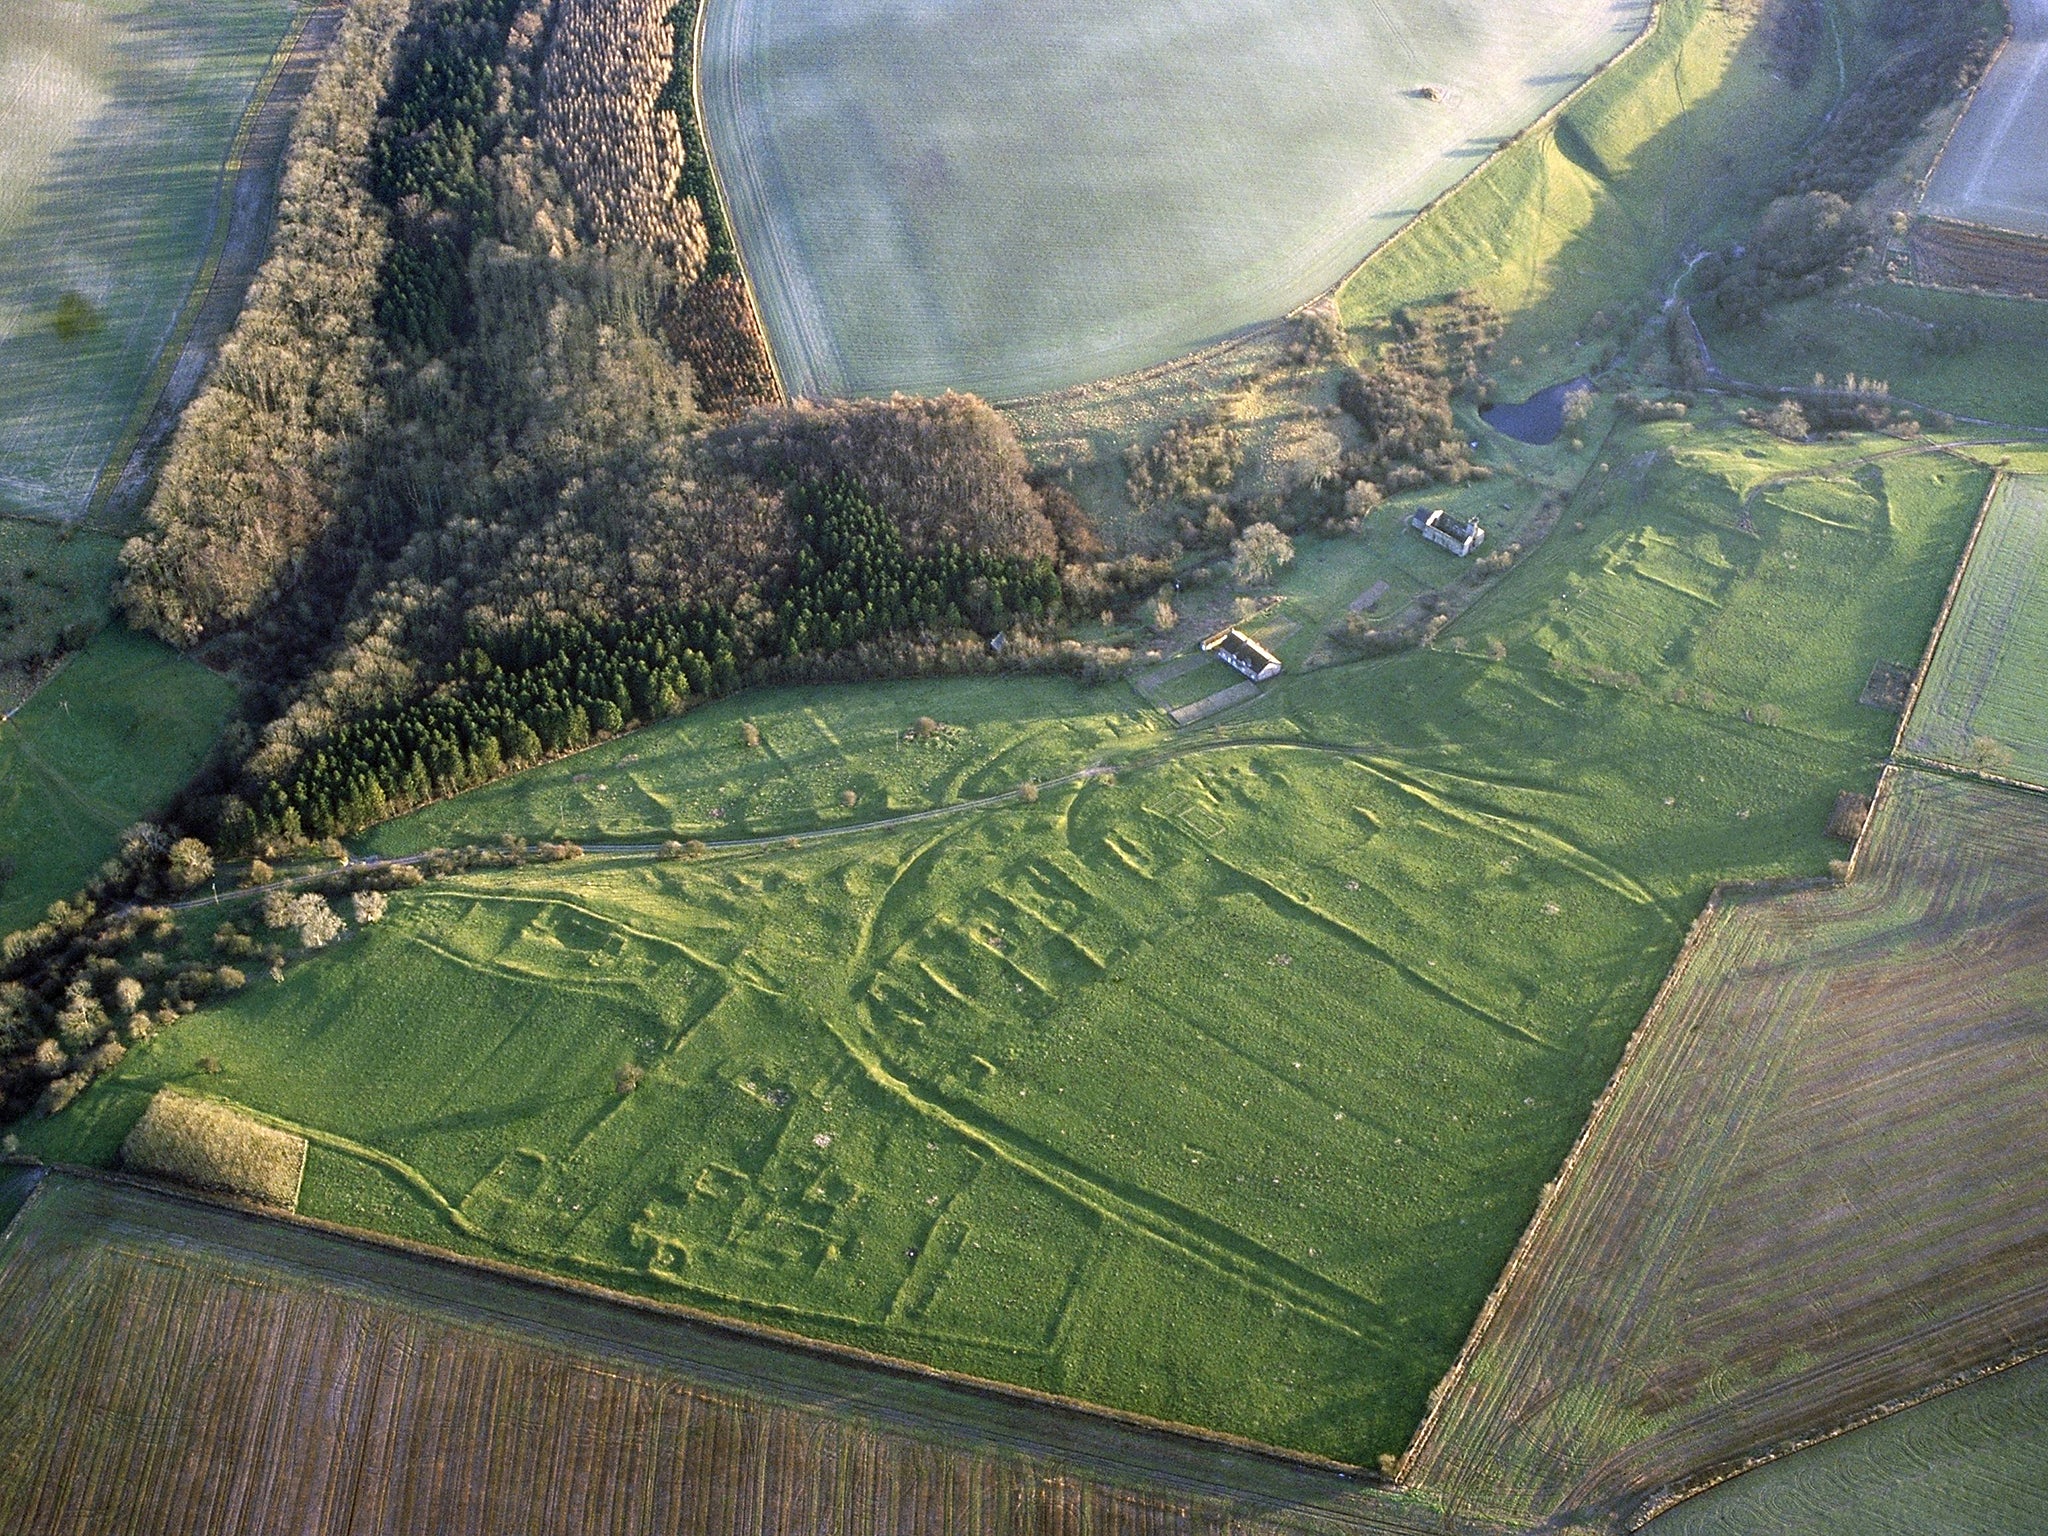 Aerial view of the abononed Yorkshire village of Wharram Percy, where bones have been excavated with evidence of post-death smashing with axes and burning